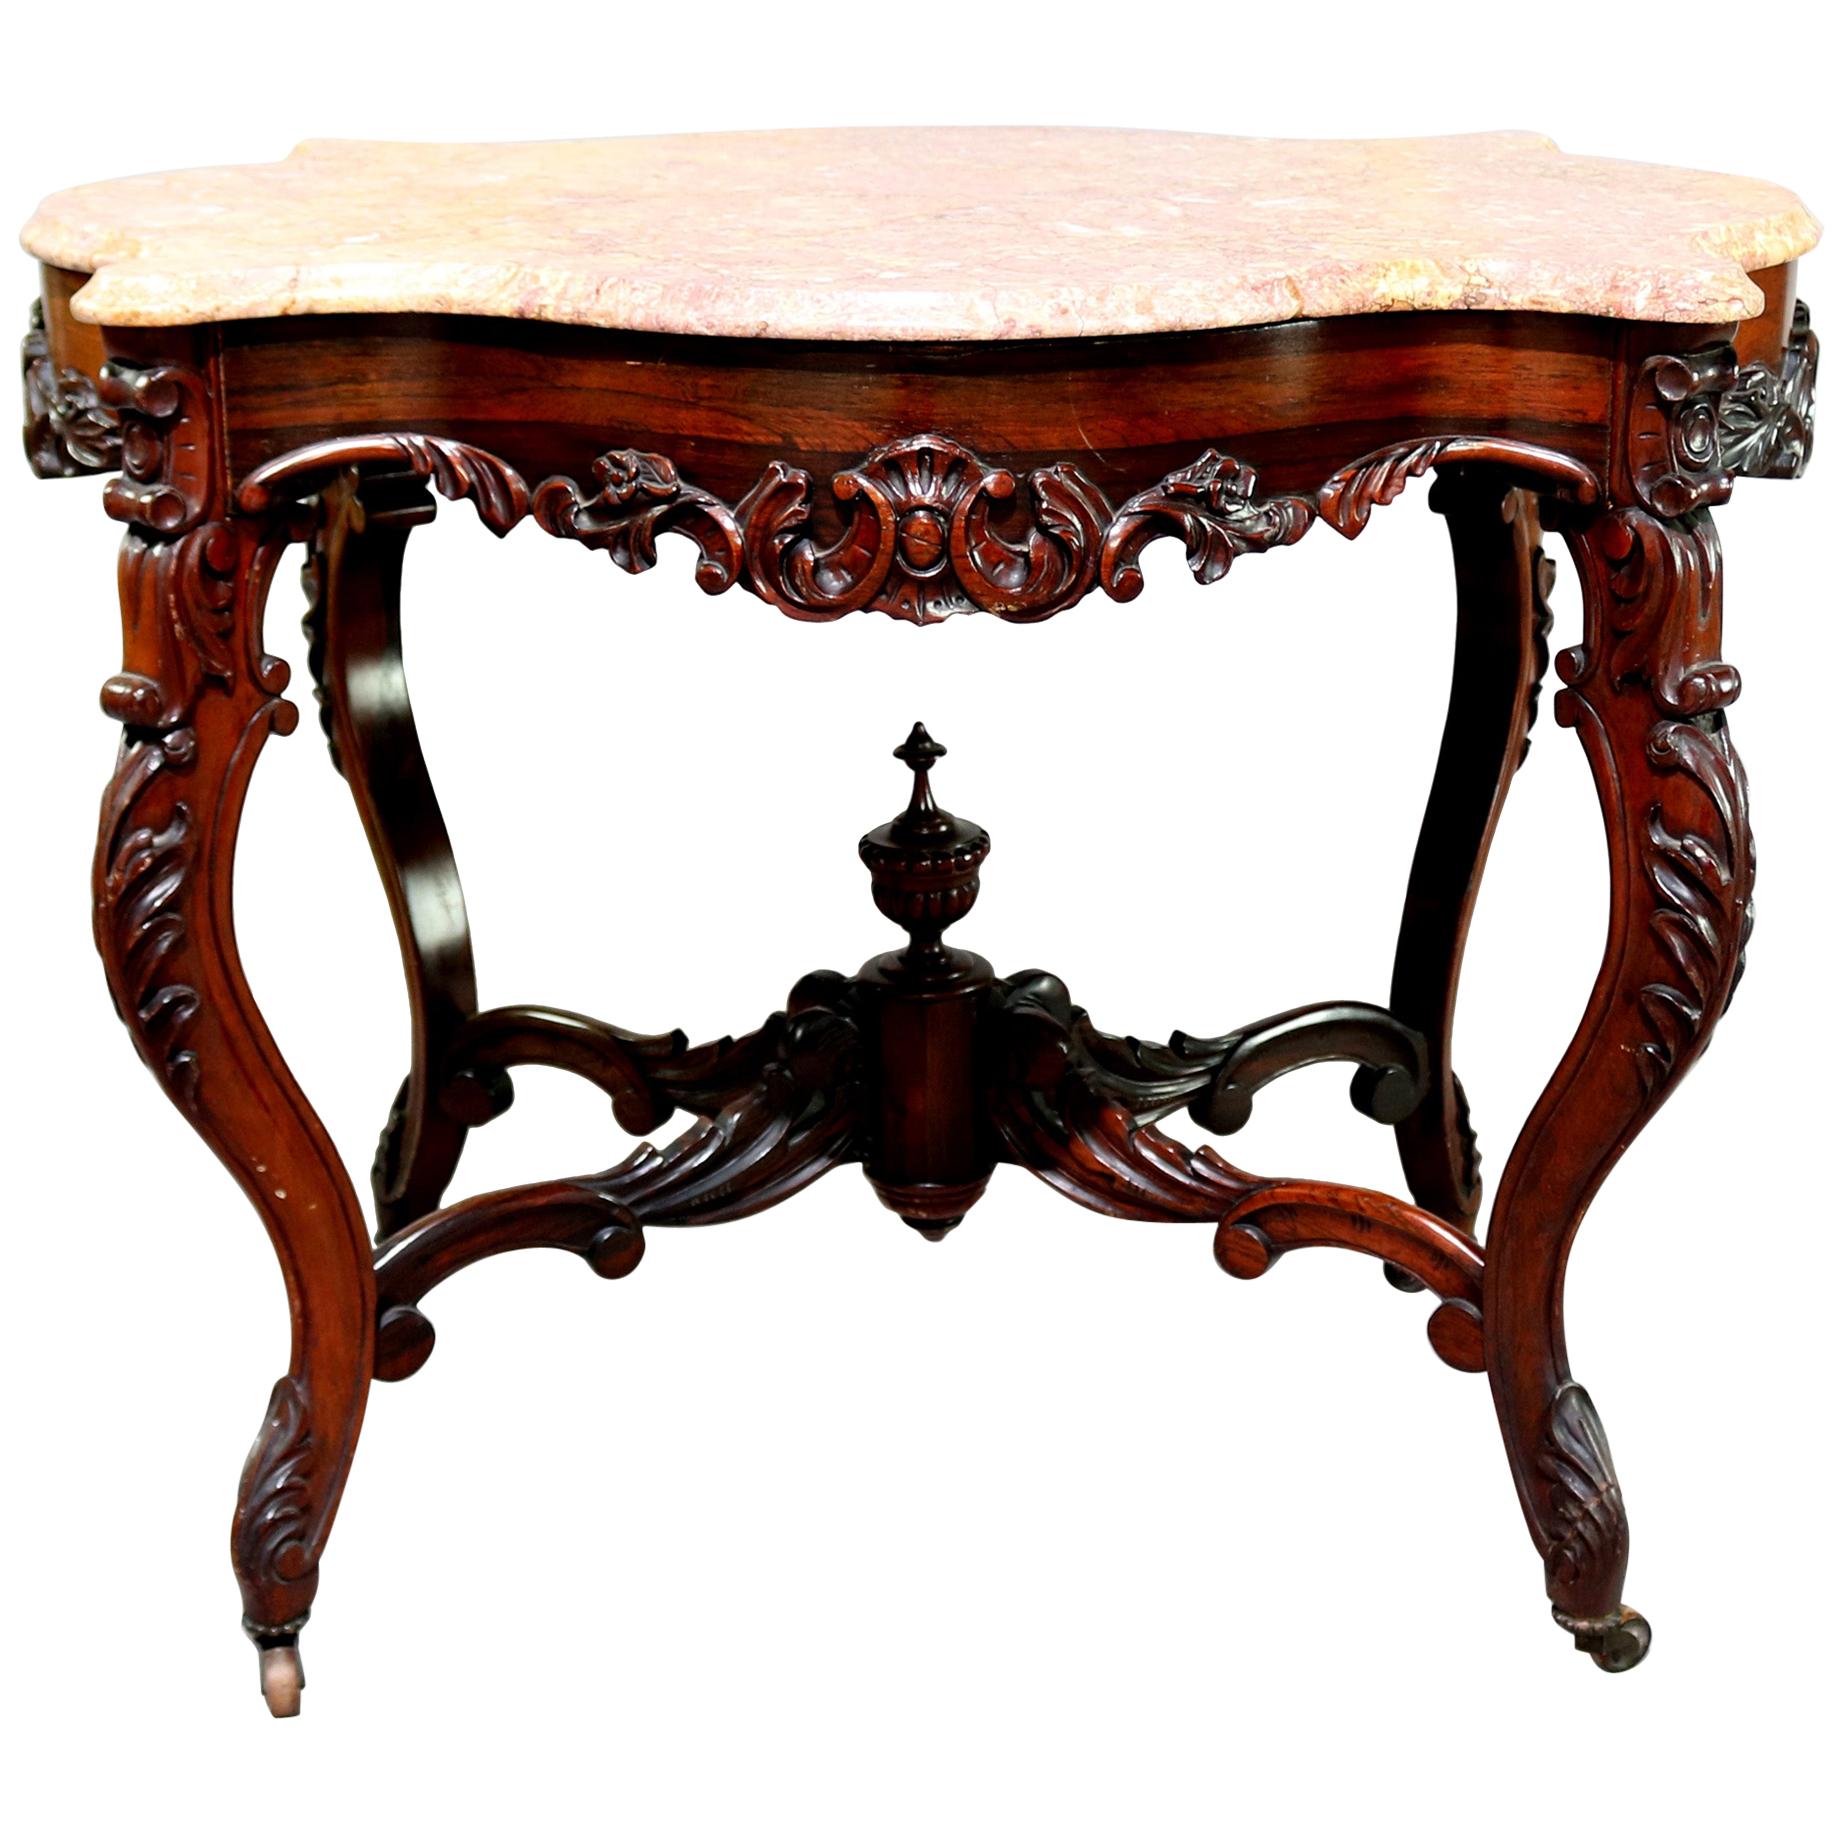 Antique Victorian Carved Rosewood and Marble Turtle Top Centre Table, circa 1870